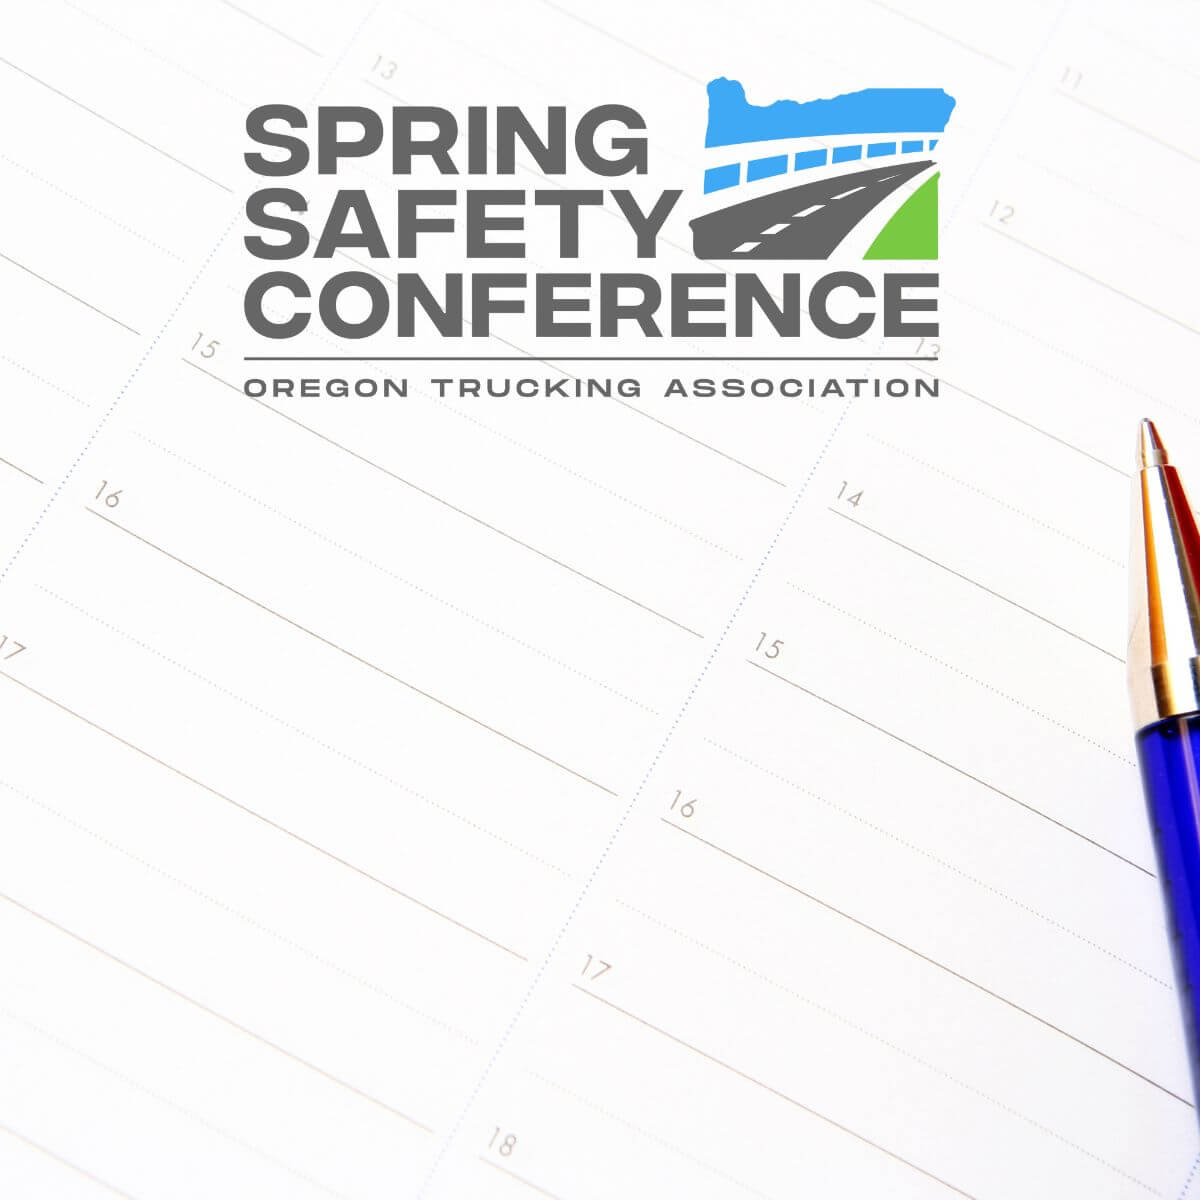 Spring Safety Conference - May 1 - 3 in Eugene!